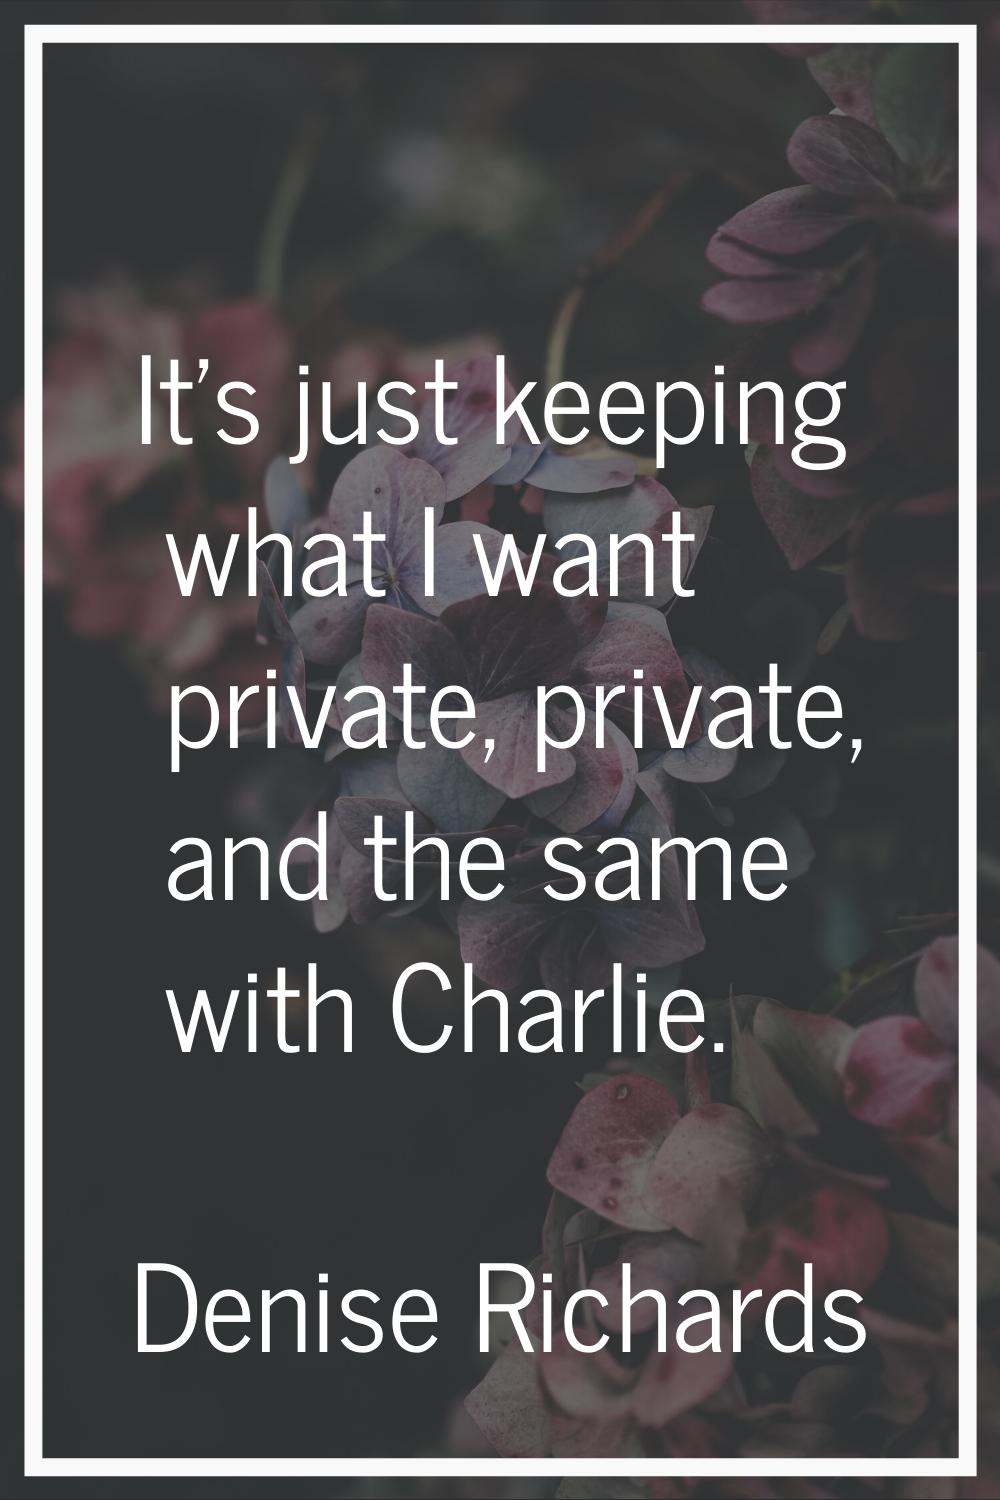 It's just keeping what I want private, private, and the same with Charlie.